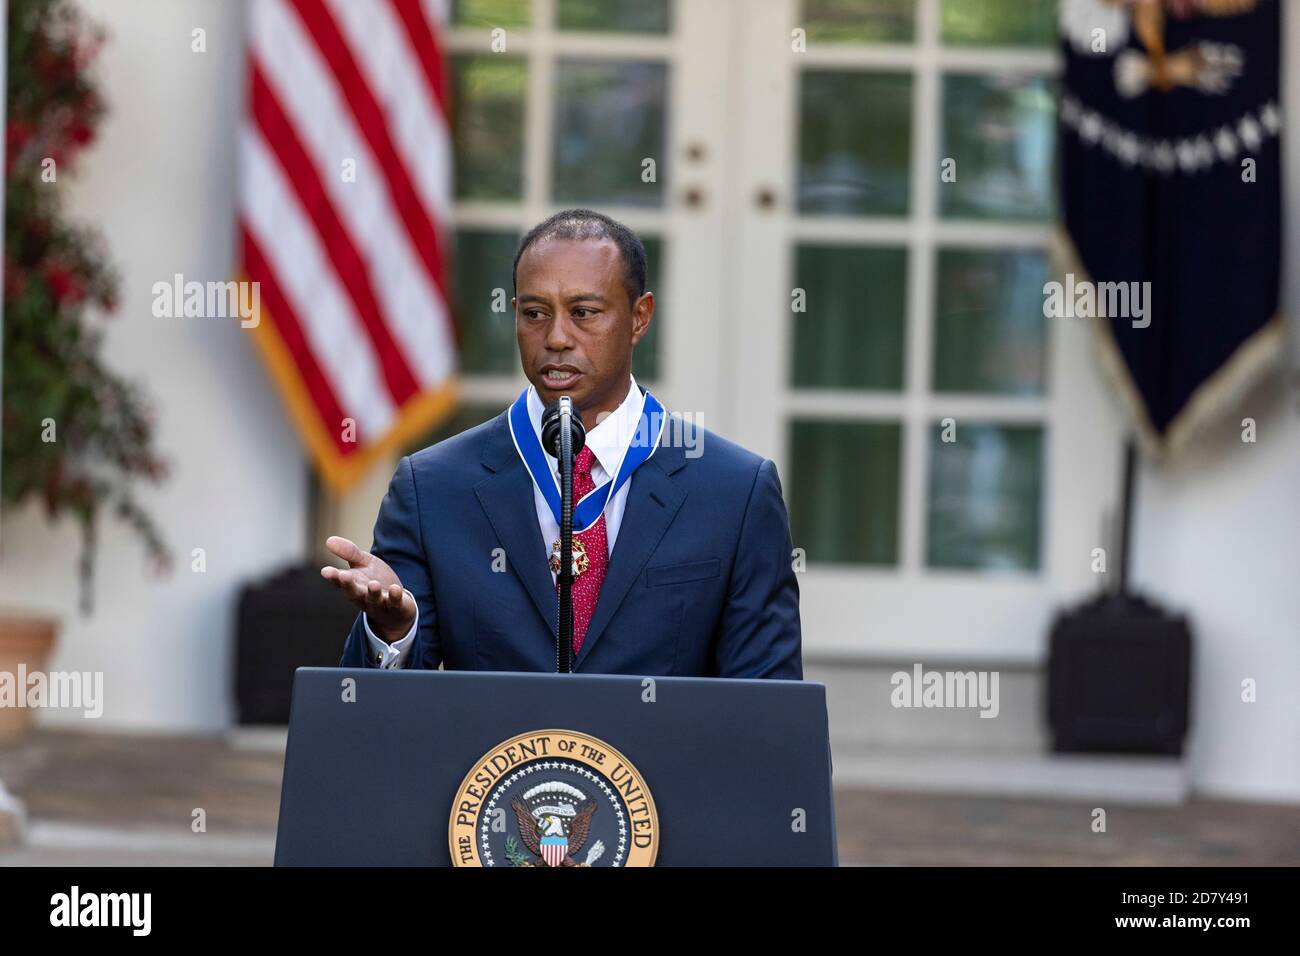 Golfer Tiger Woods speaks after receiving the Presidential Medal of Freedom from U.S. President Donald Trump in the Rose Garden of the White House in Washington, D.C. on Monday, May 6, 2019. The Presidential Medal of Freedom is the highest honor a U.S. President can bestow on a civilian. Woods is the fourth golfer to receive the award. Credit: Alex Edelman/The Photo Access Stock Photo